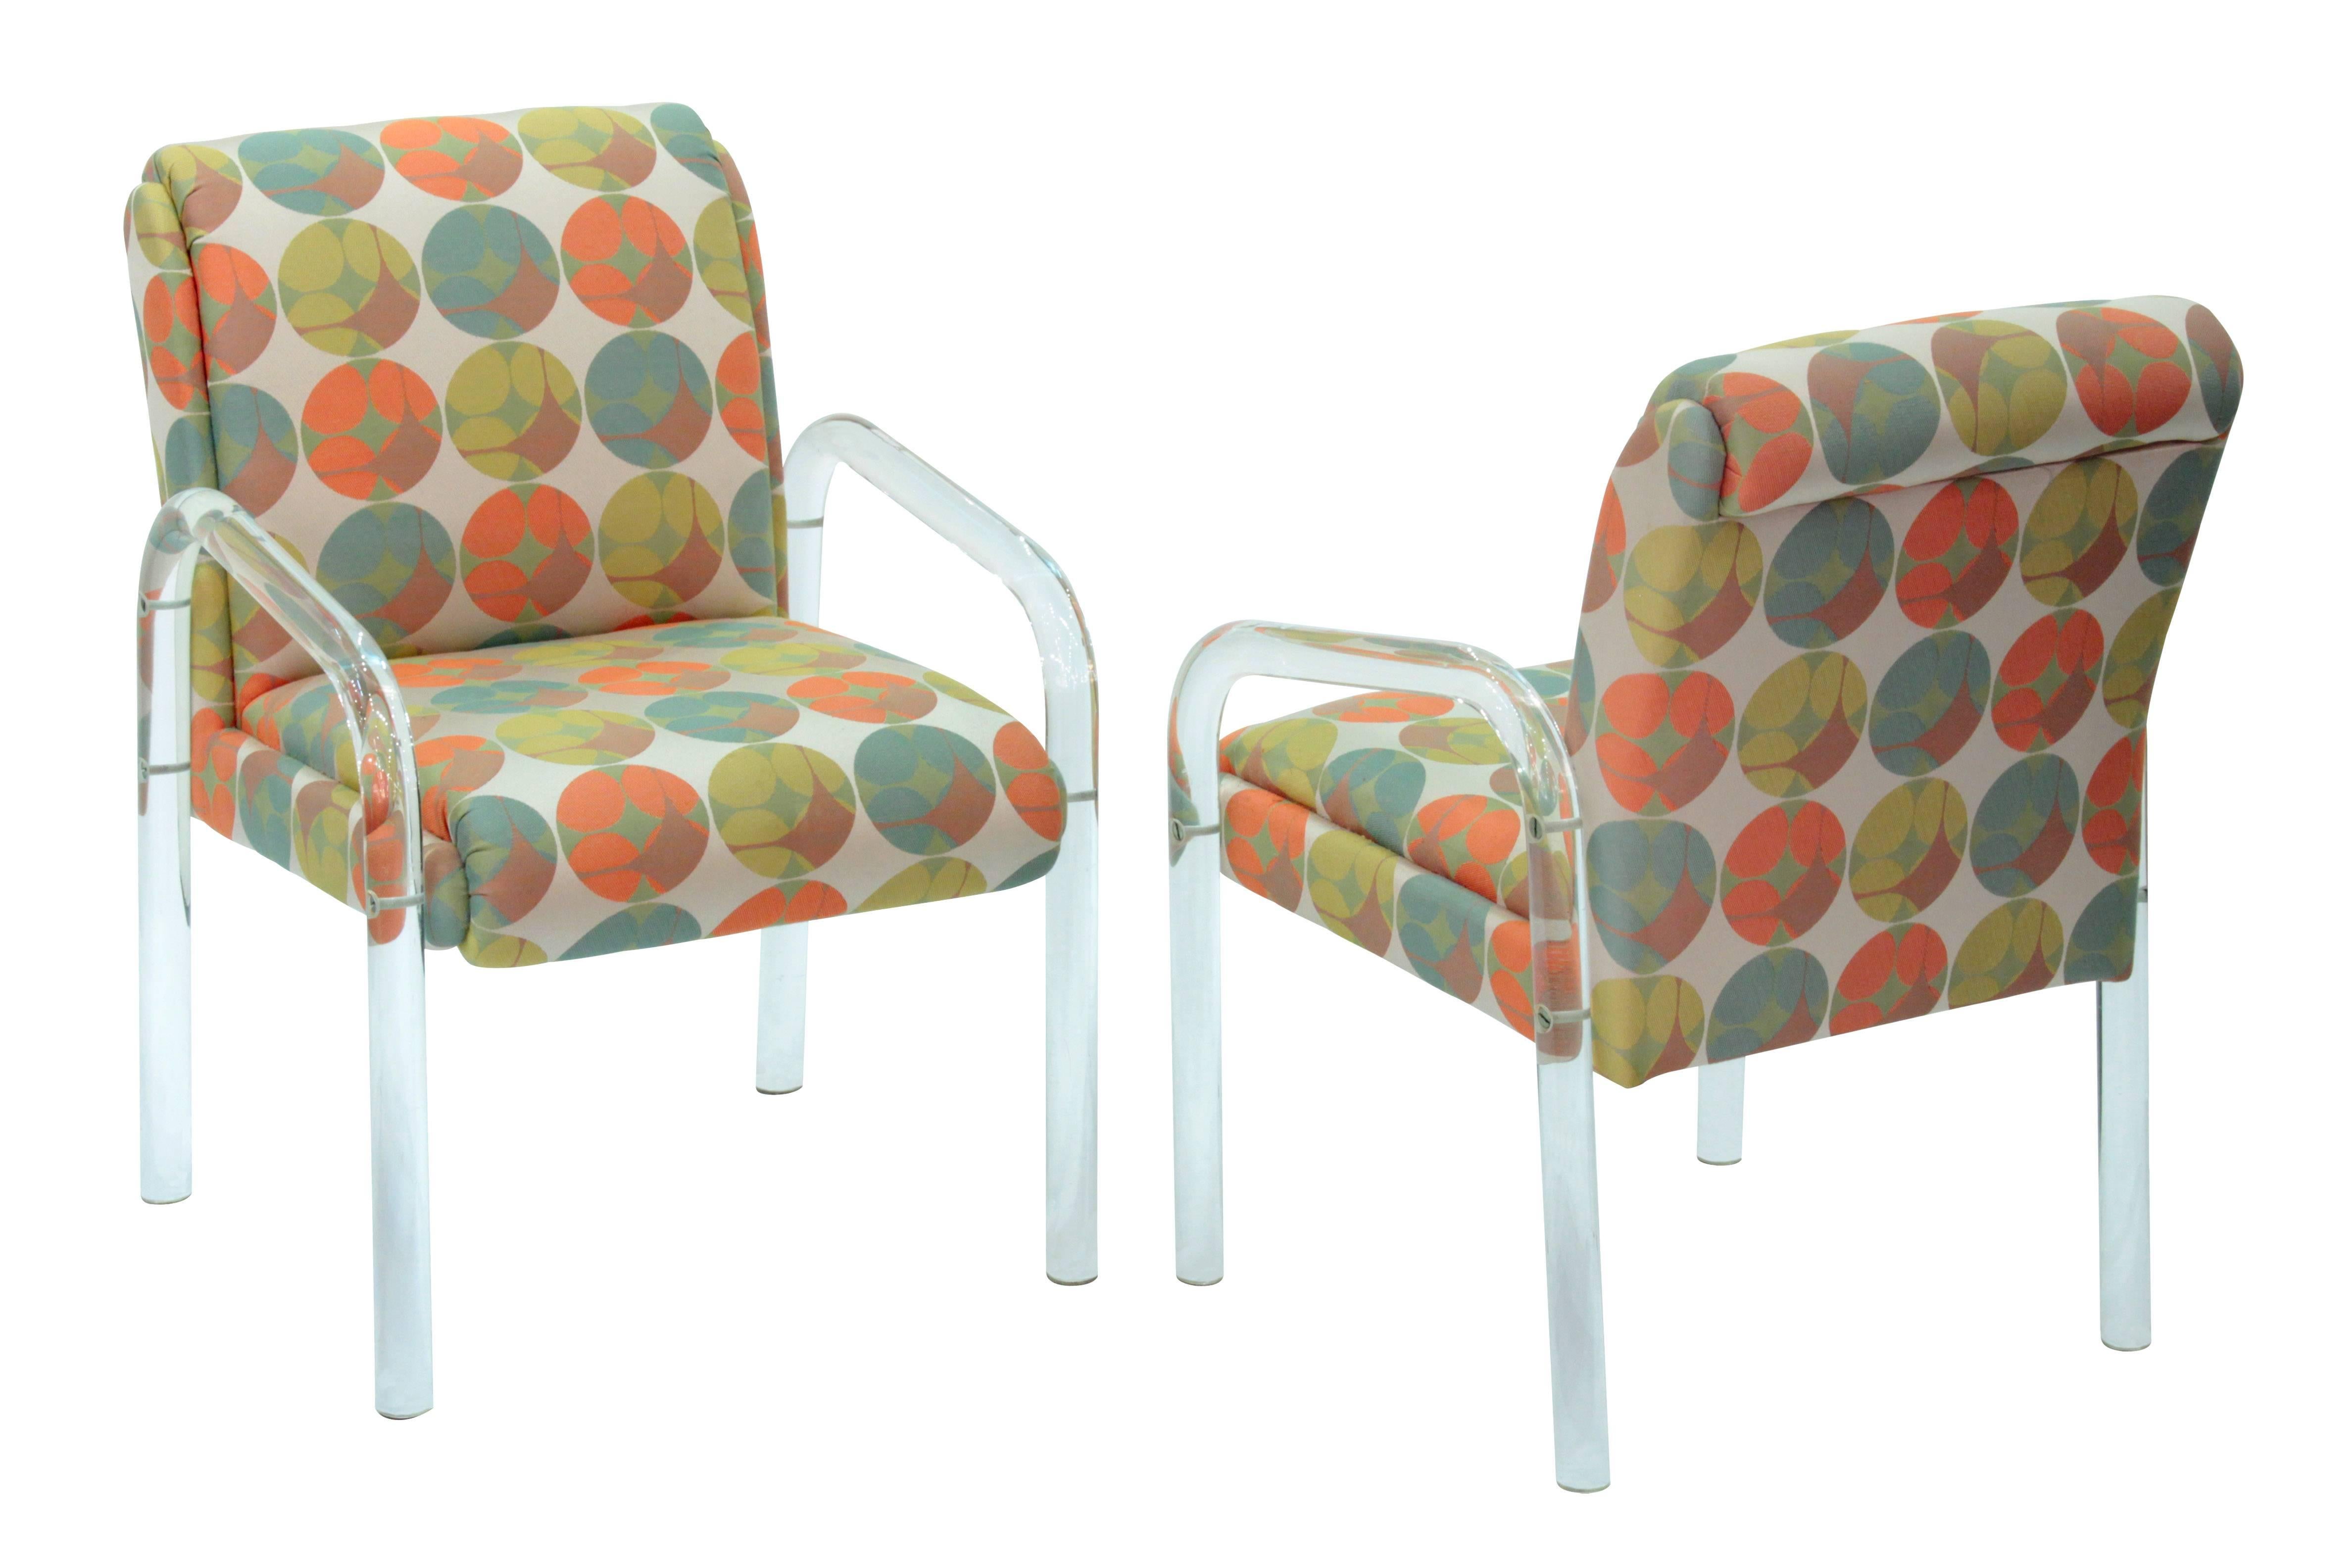 Set of four dining / game chairs in Lucite with geometric printed fabric by Leon Rosen for Pace Collection, American, 1970s.